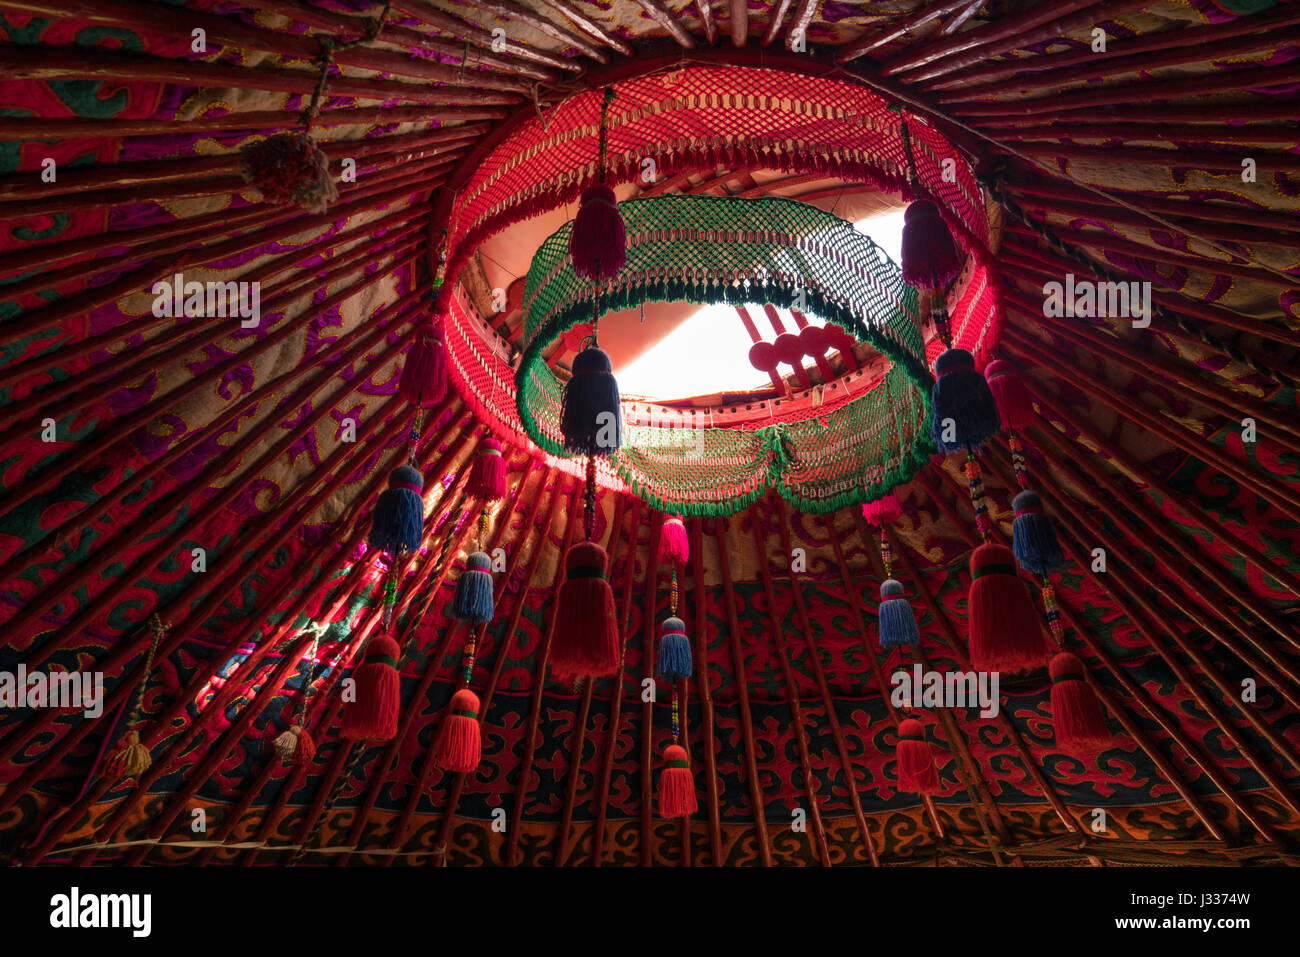 Red felt ornaments in the roof of a Kyrgyz yurt Stock Photo